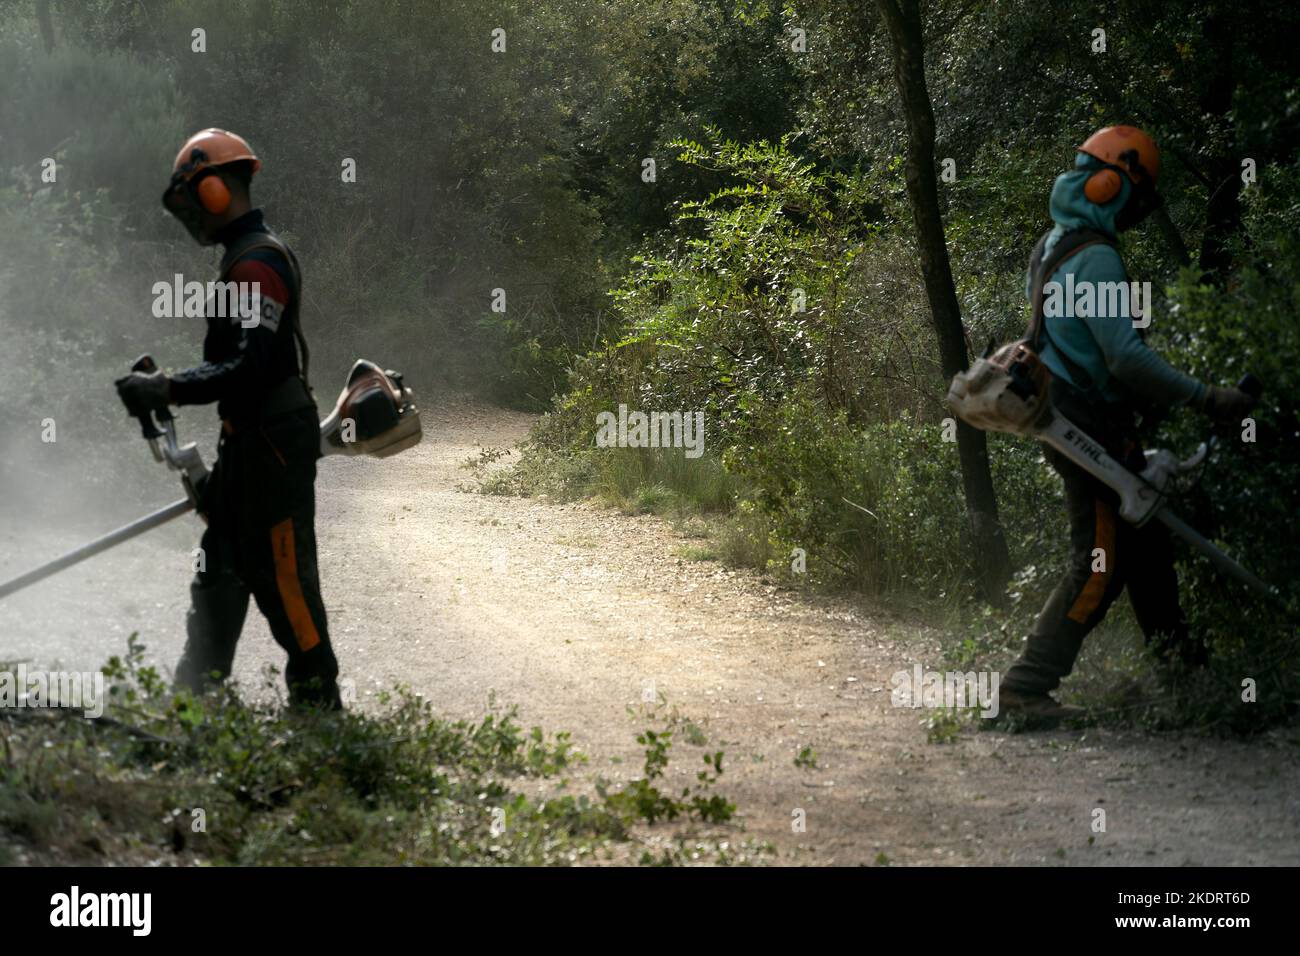 Barcelona, Spain - October 26, 2022: Two people equipped with brush cutters clear a path in the forest Stock Photo